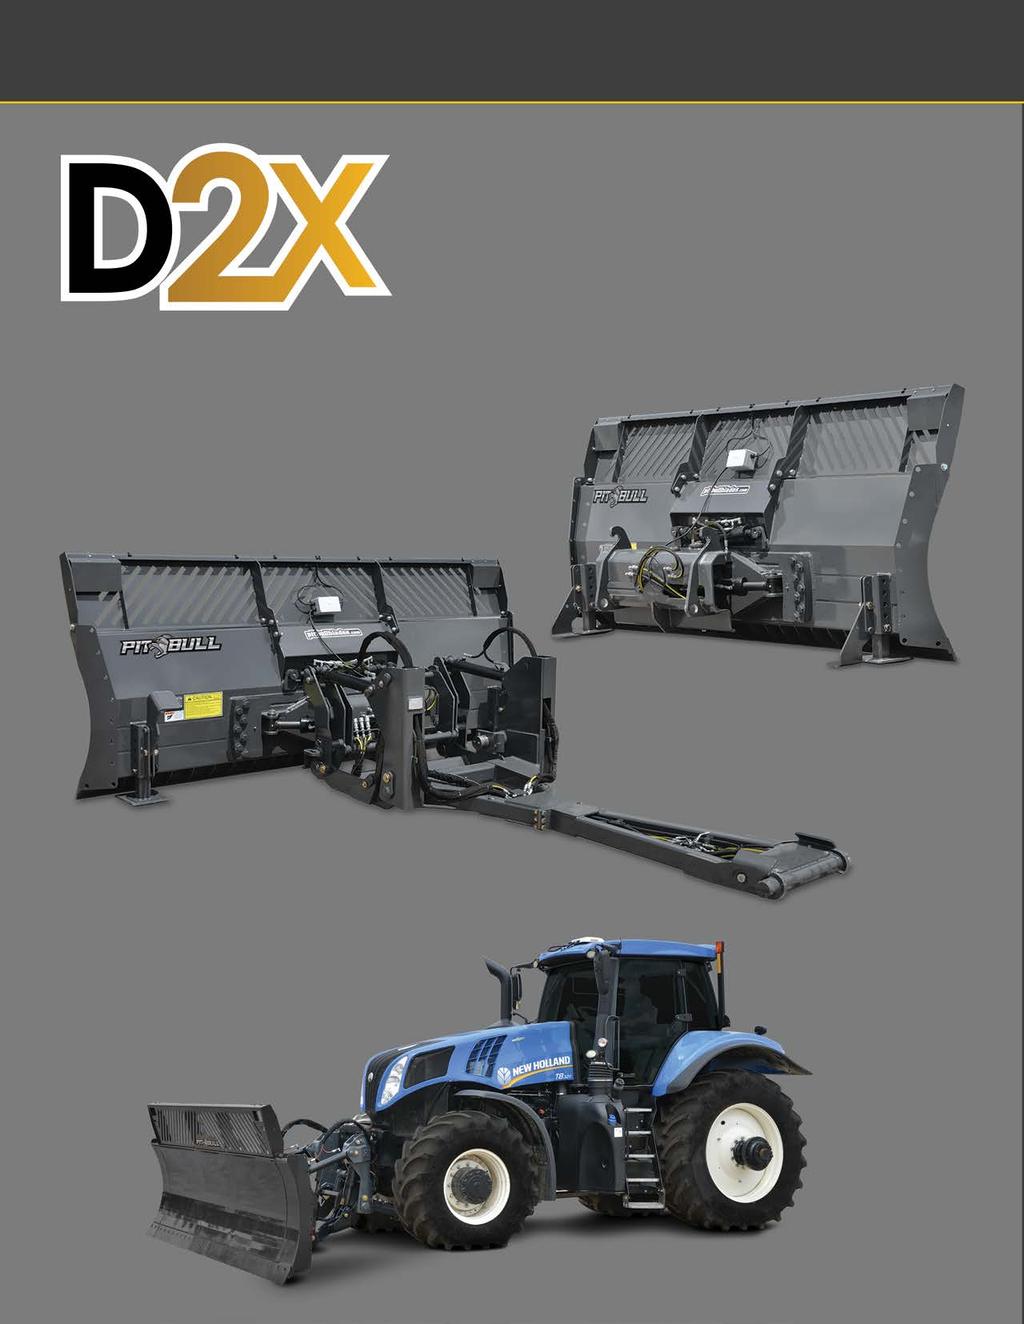 DUAL DISCONNECT UNDERMOUNT With the introduction of the D2X Dual Disconnect Undermount, Pitbull has completely changed the